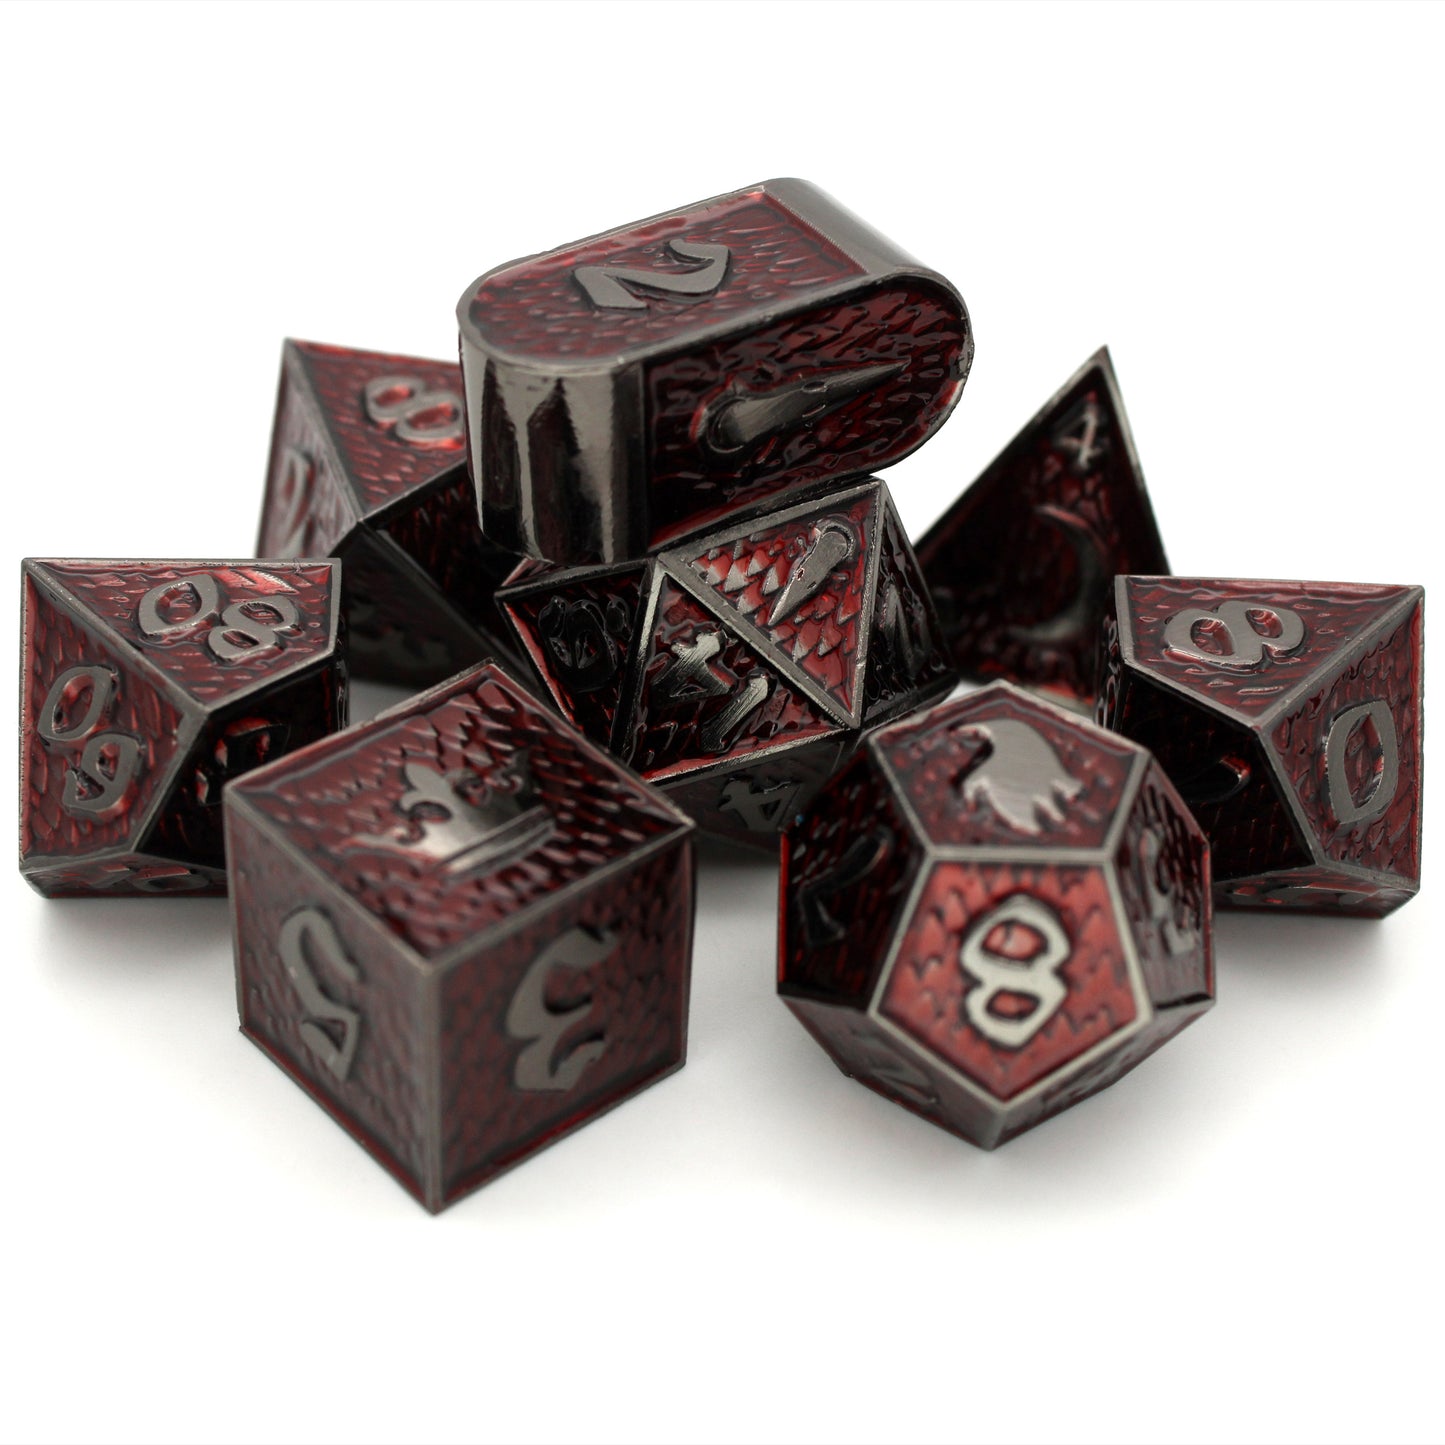 Death Mother is an 8-piece Dice Envy exclusive set of gunmetal dice in our Raven Queen mold, cloaked in blood red ink.